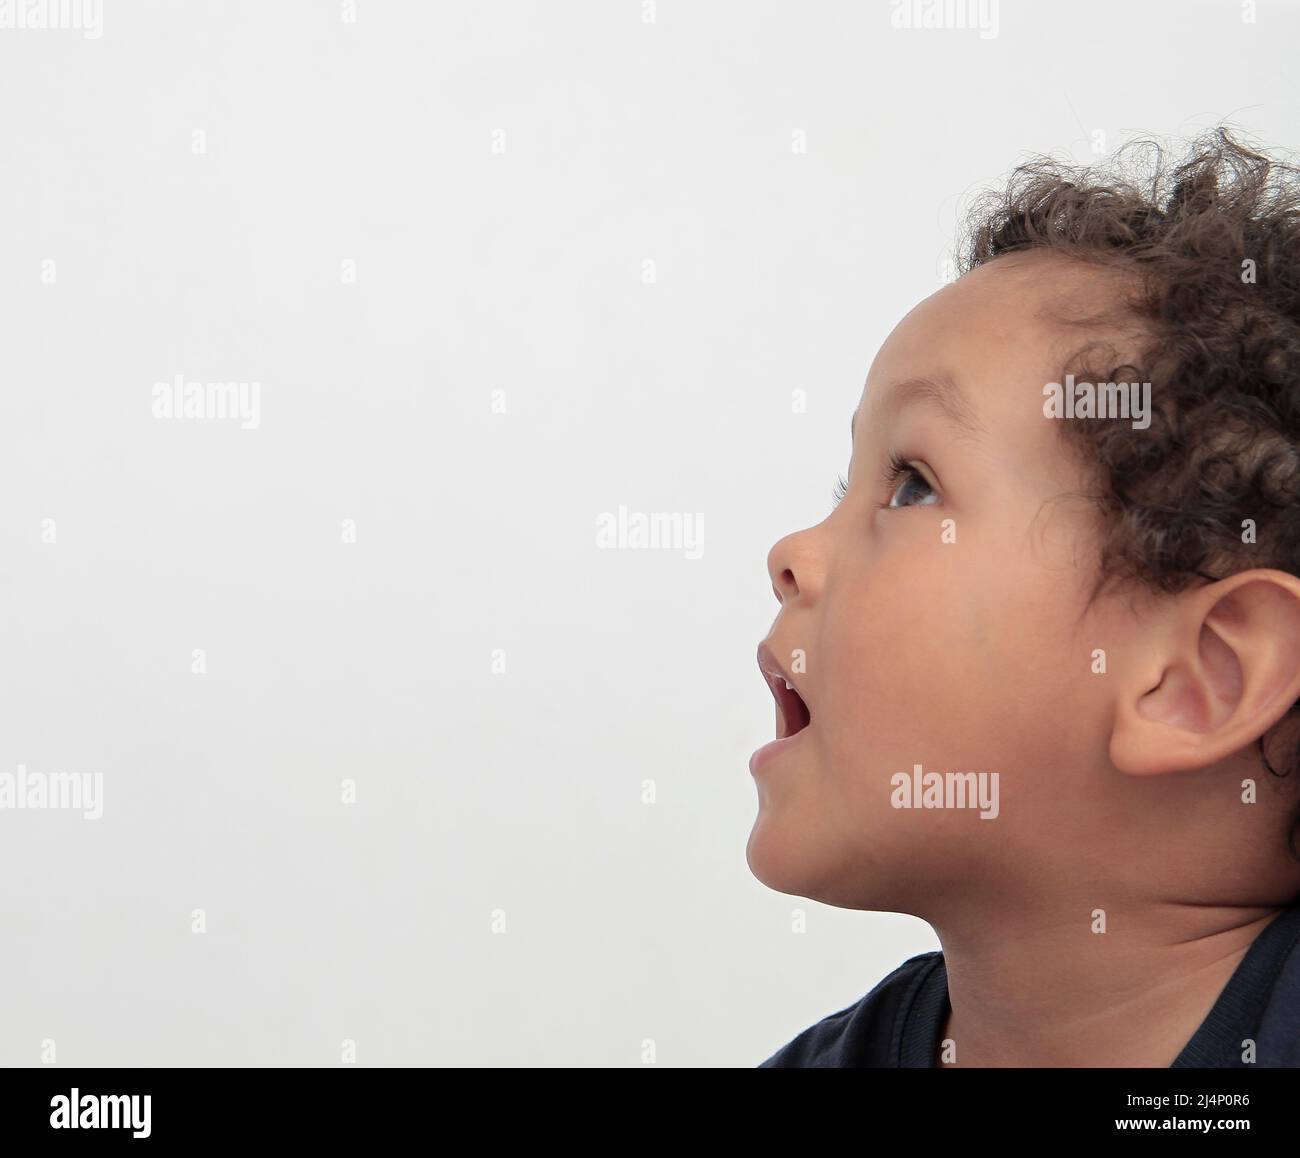 boy shouting with open mouth with people stock image stock photo Stock Photo